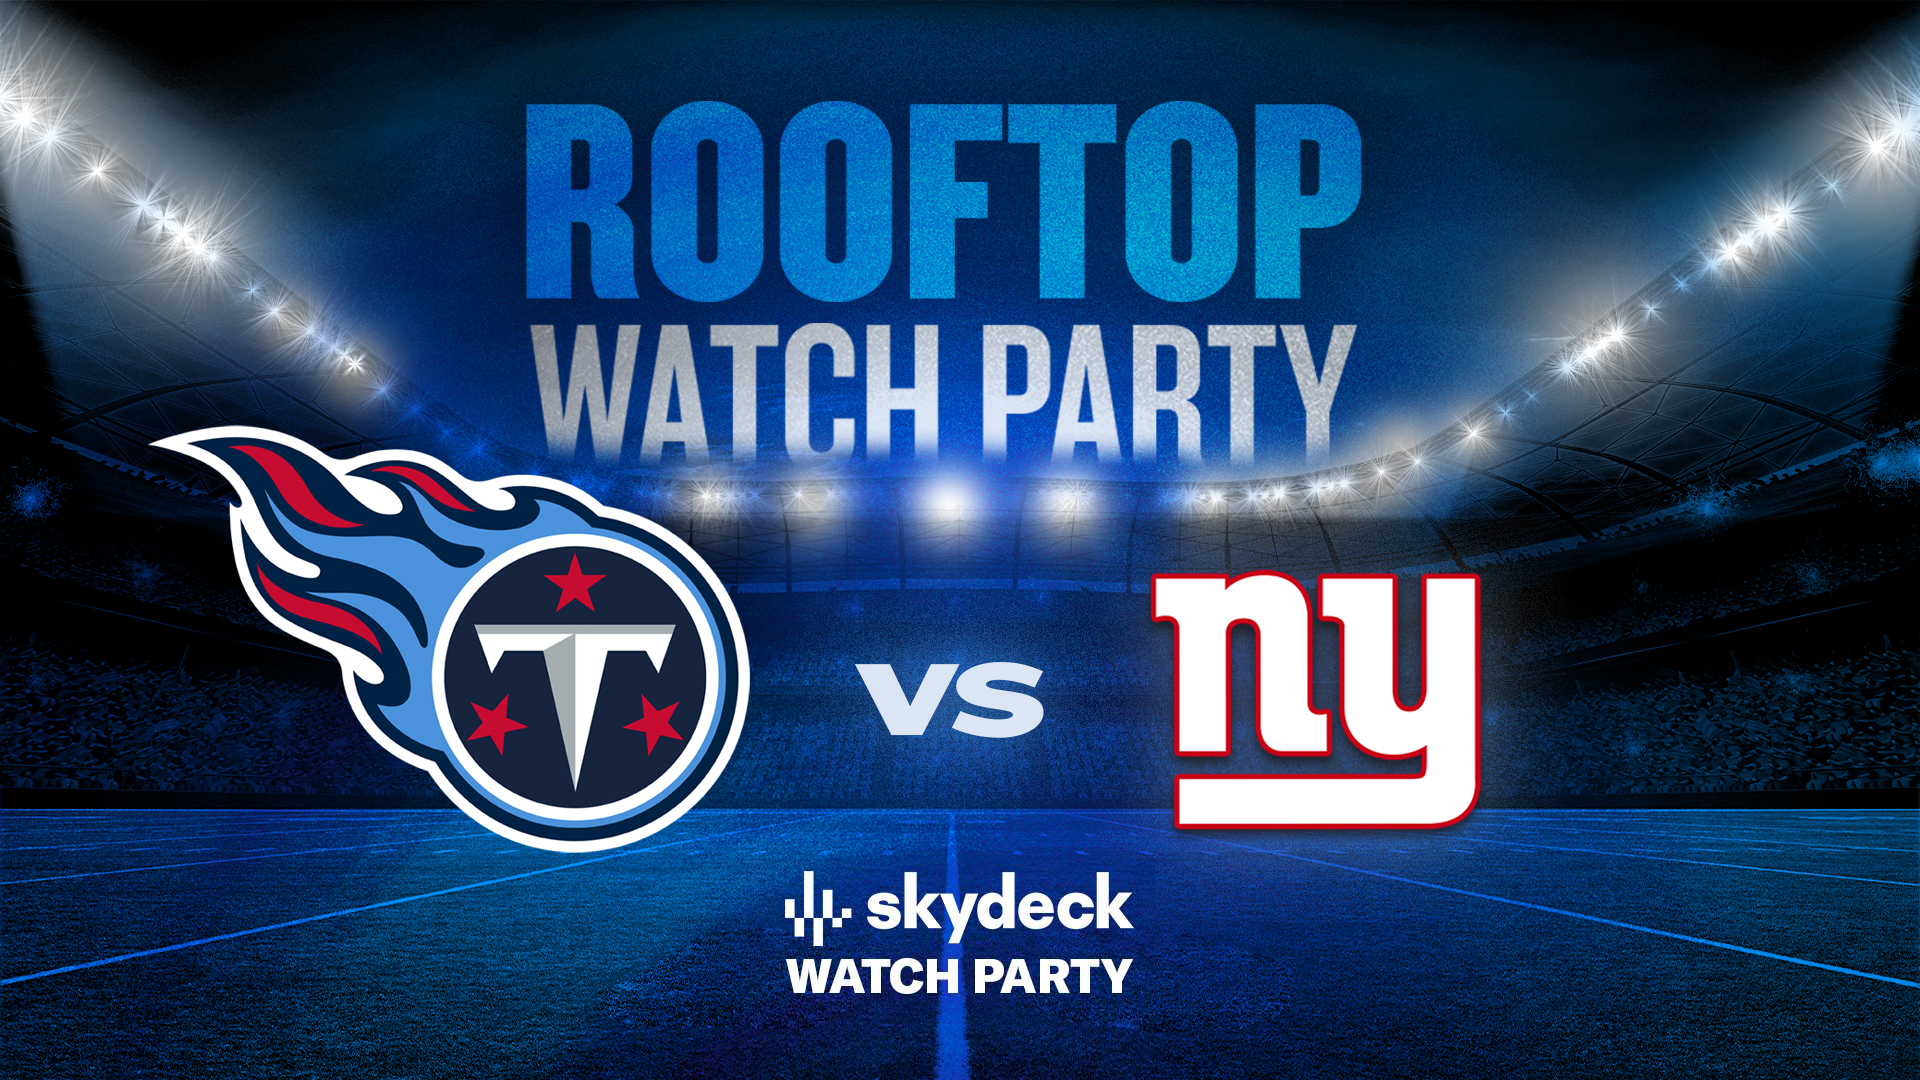 Promo image of Titans vs. Giants | Skydeck Watch Party